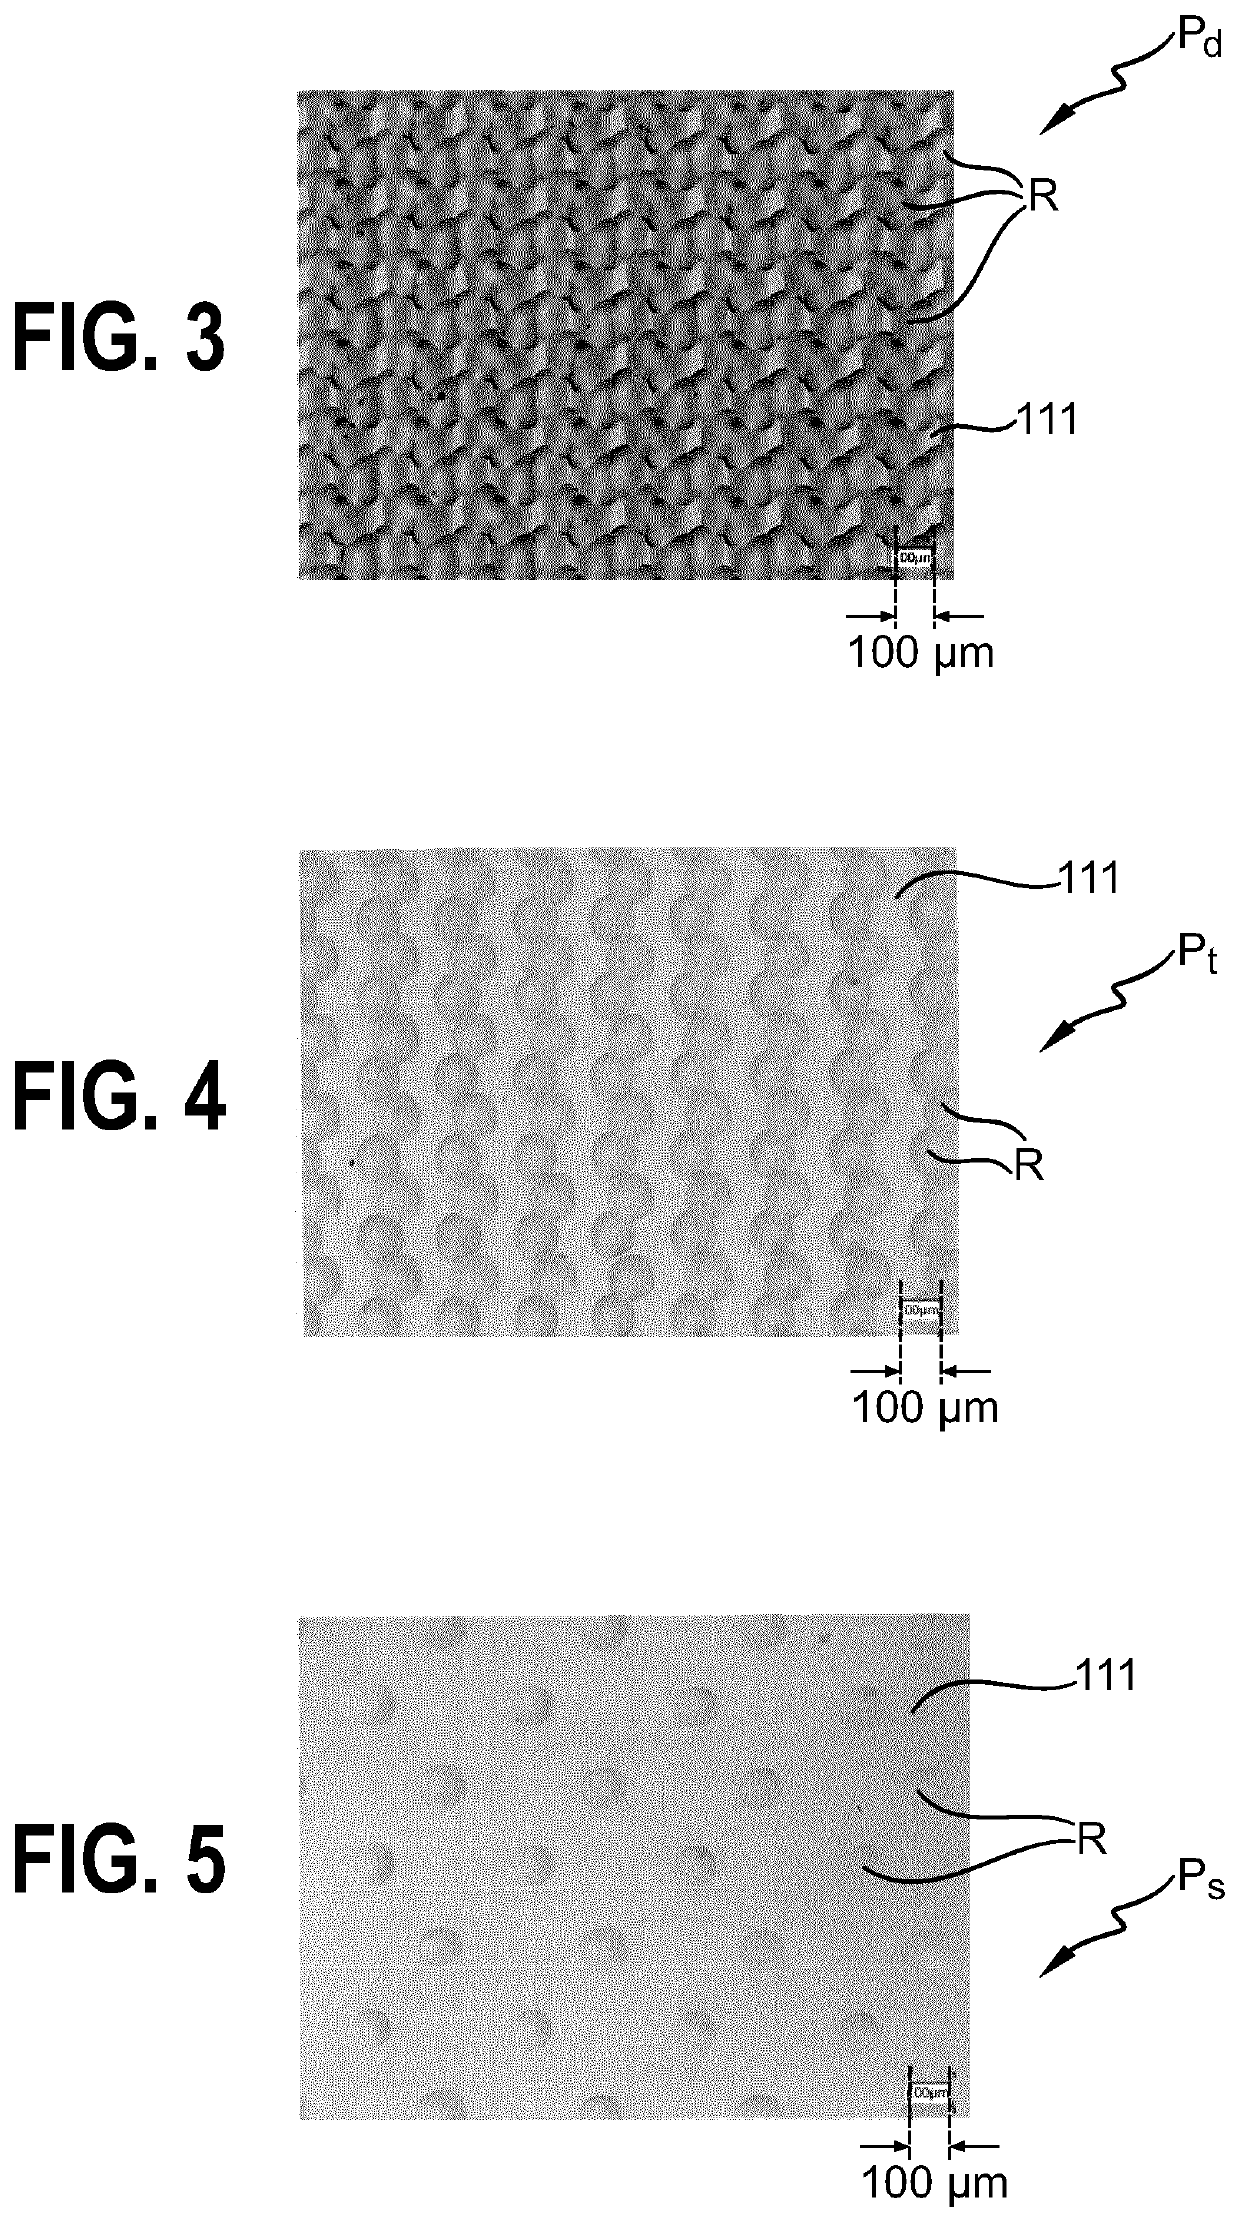 Method of manufacturing an LED module